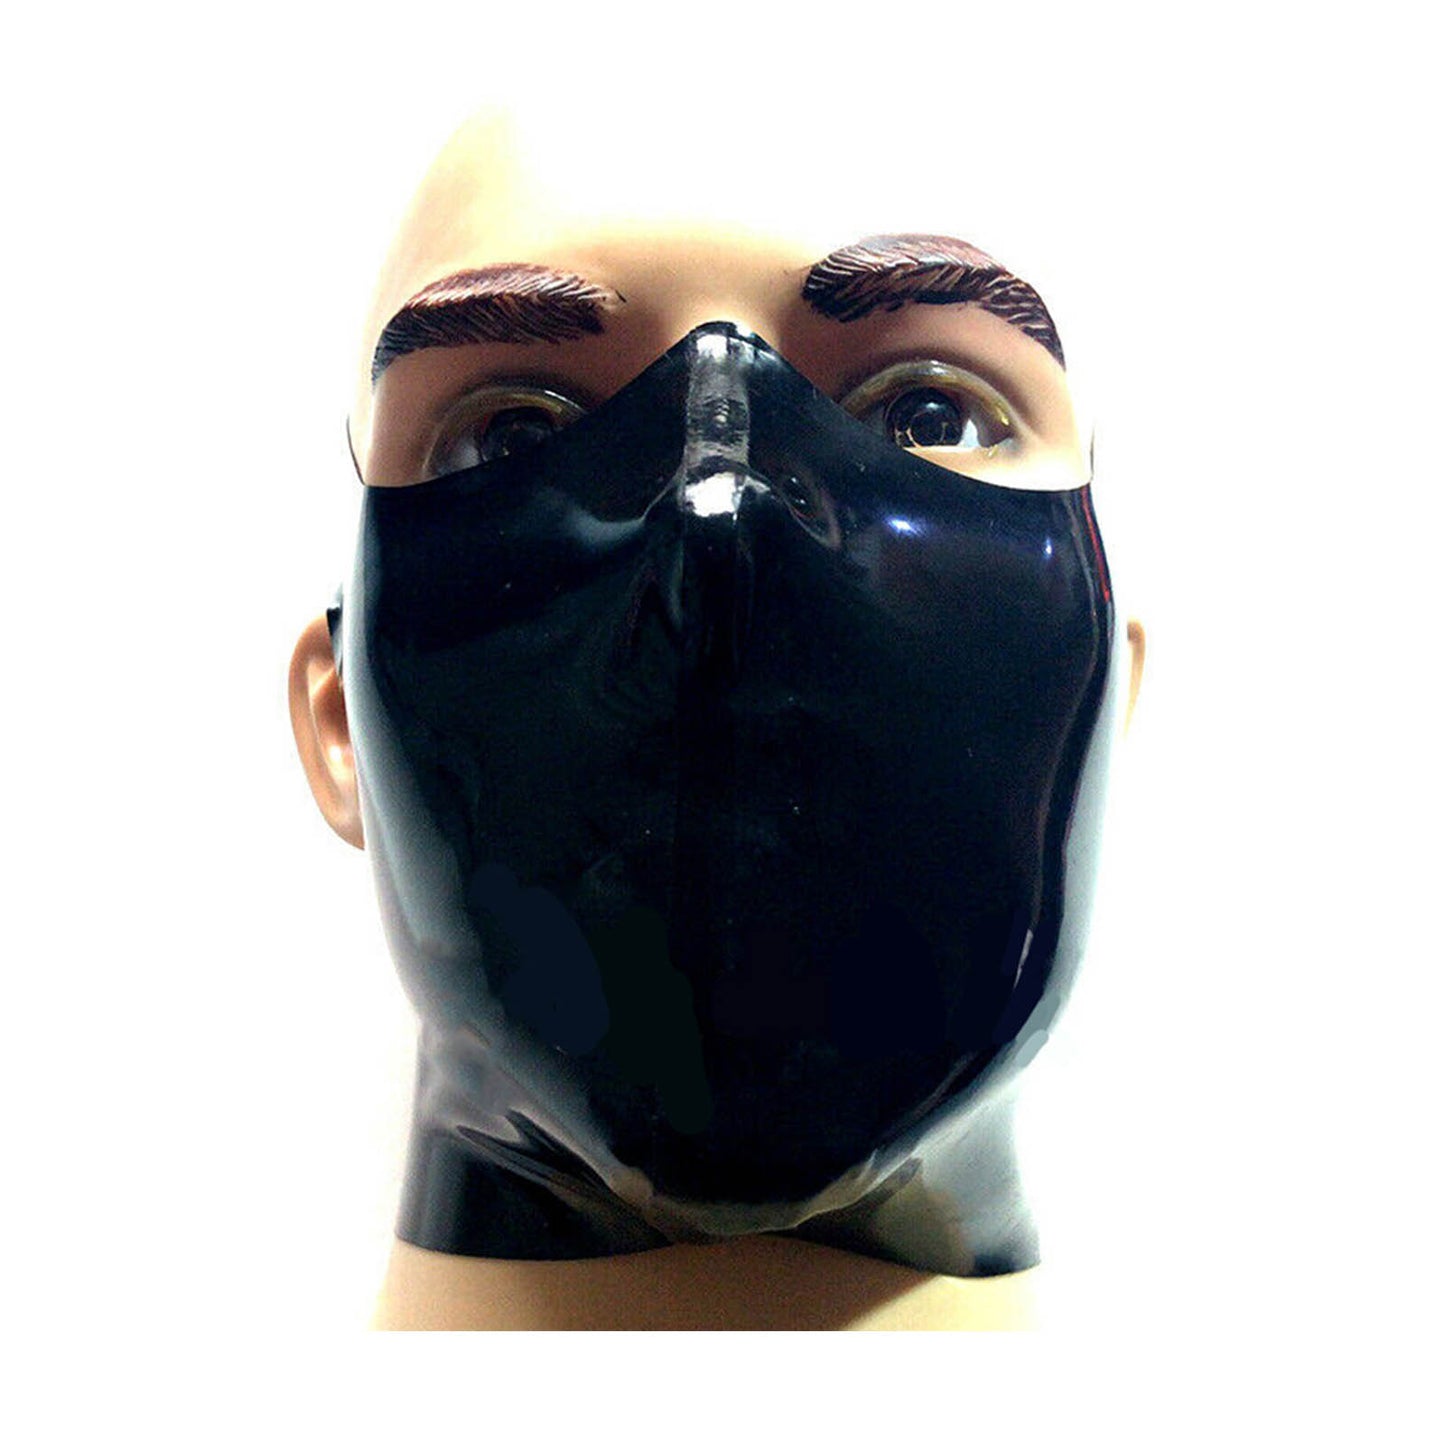 MONNIK Latex Fashion Mask Cross Mouth Cover Hood Handmade for Catsuit Cosplay Fetish Accessories